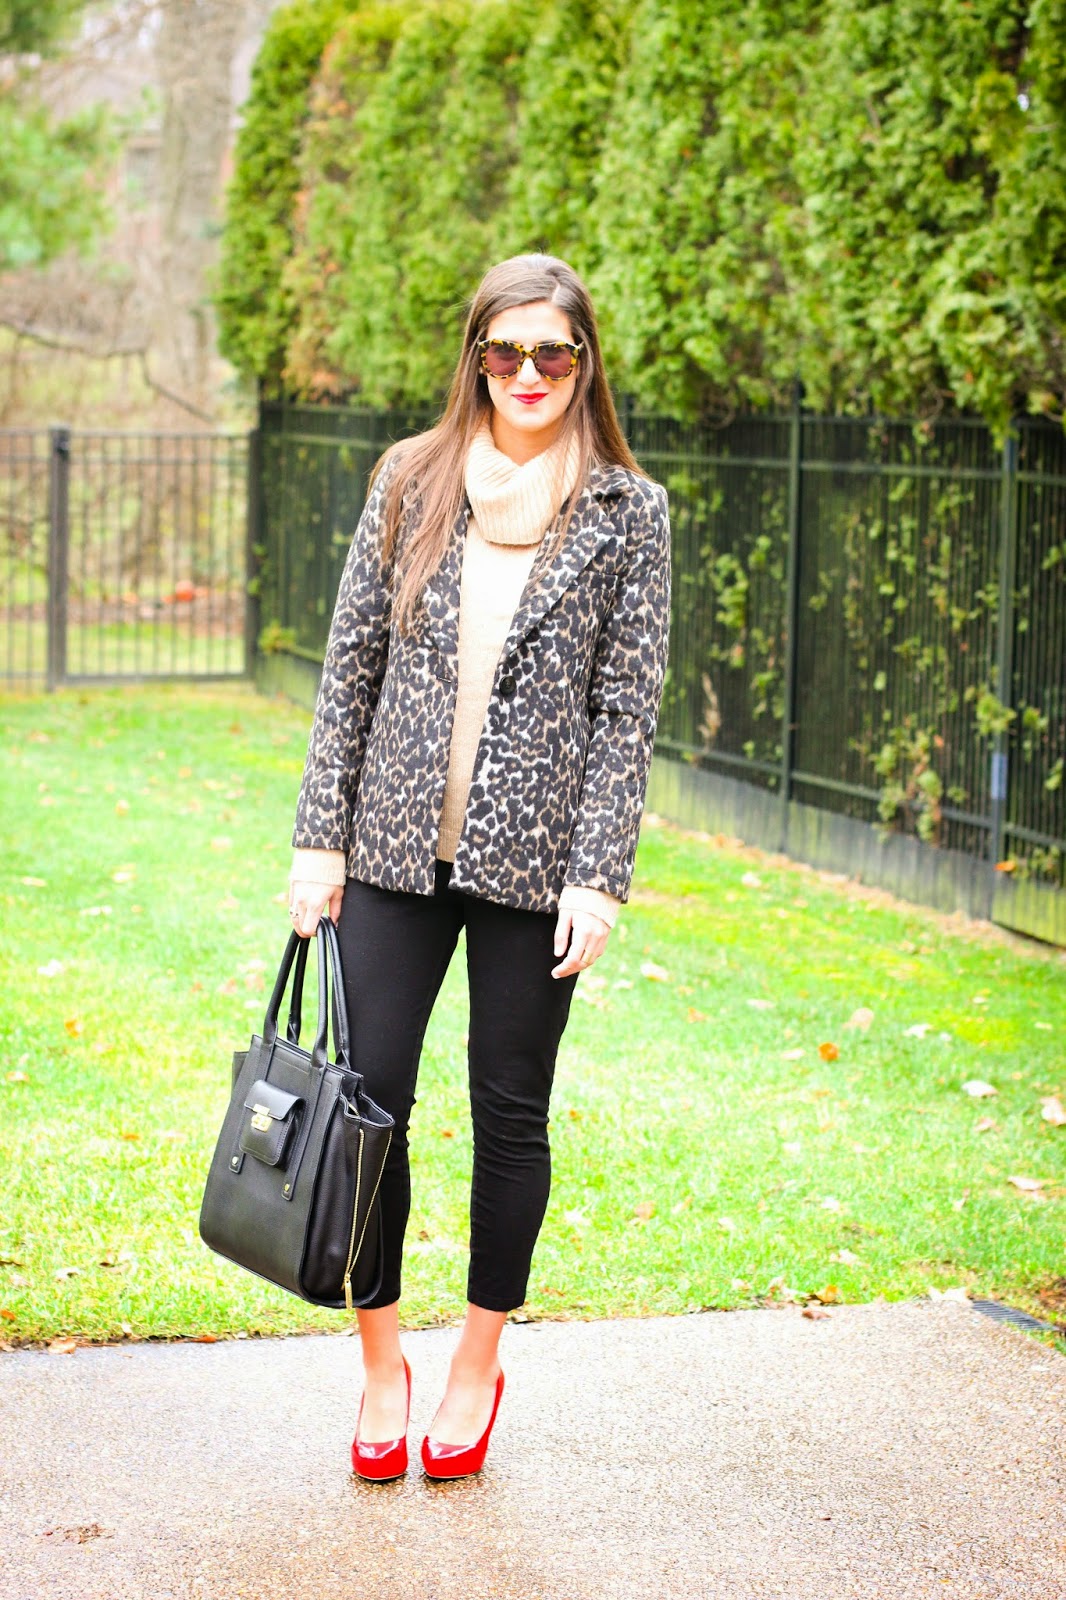 Sincerely Miss Ash: HOW TO STYLE: LEOPARD LEGGINGS